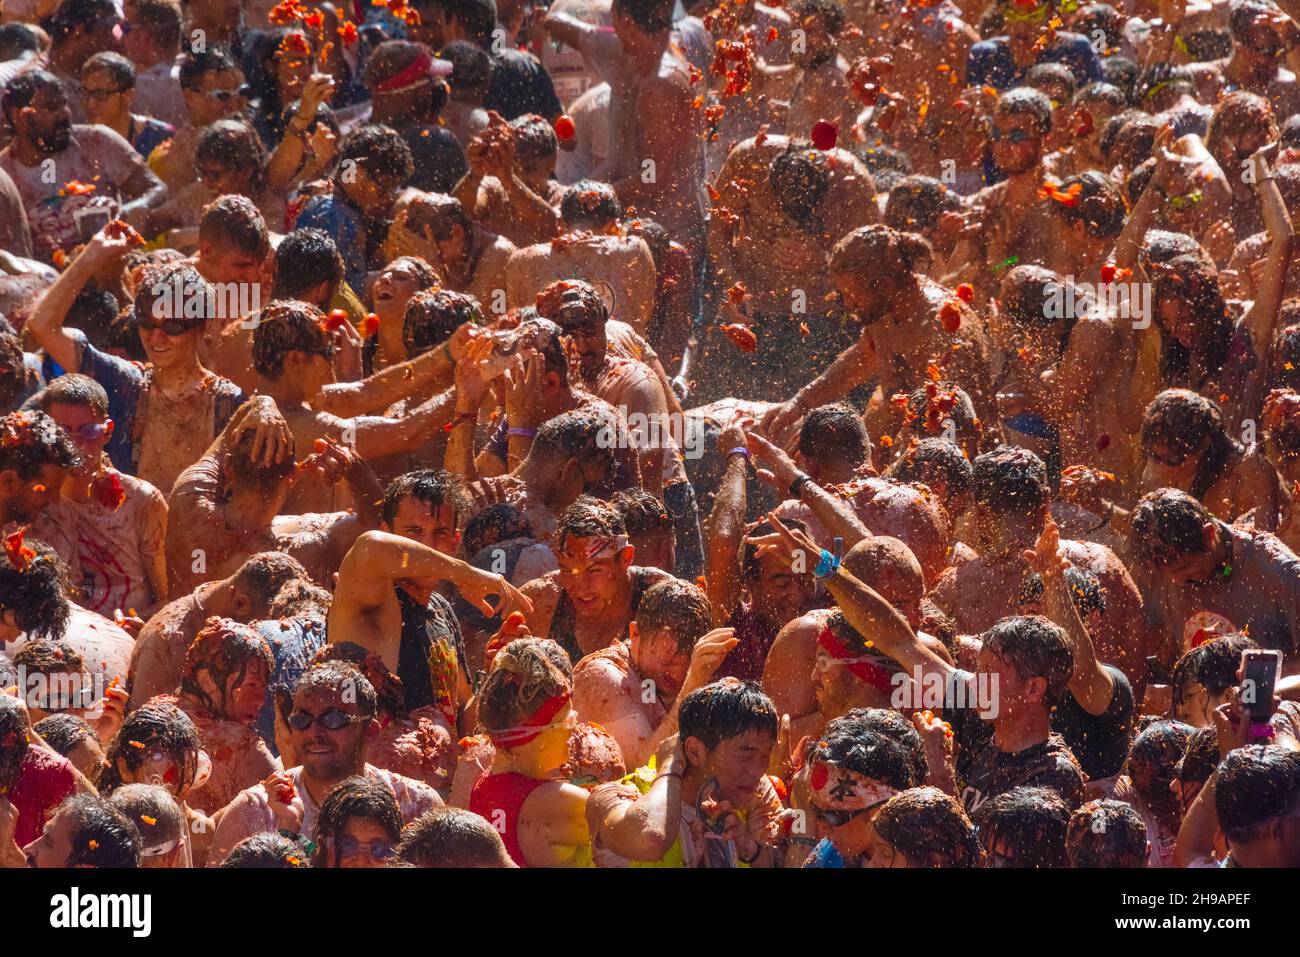 People throwing tomatoes at La Tomatina (Tomato Festival), Bunol, Valencia Province, Spain Stock Photo